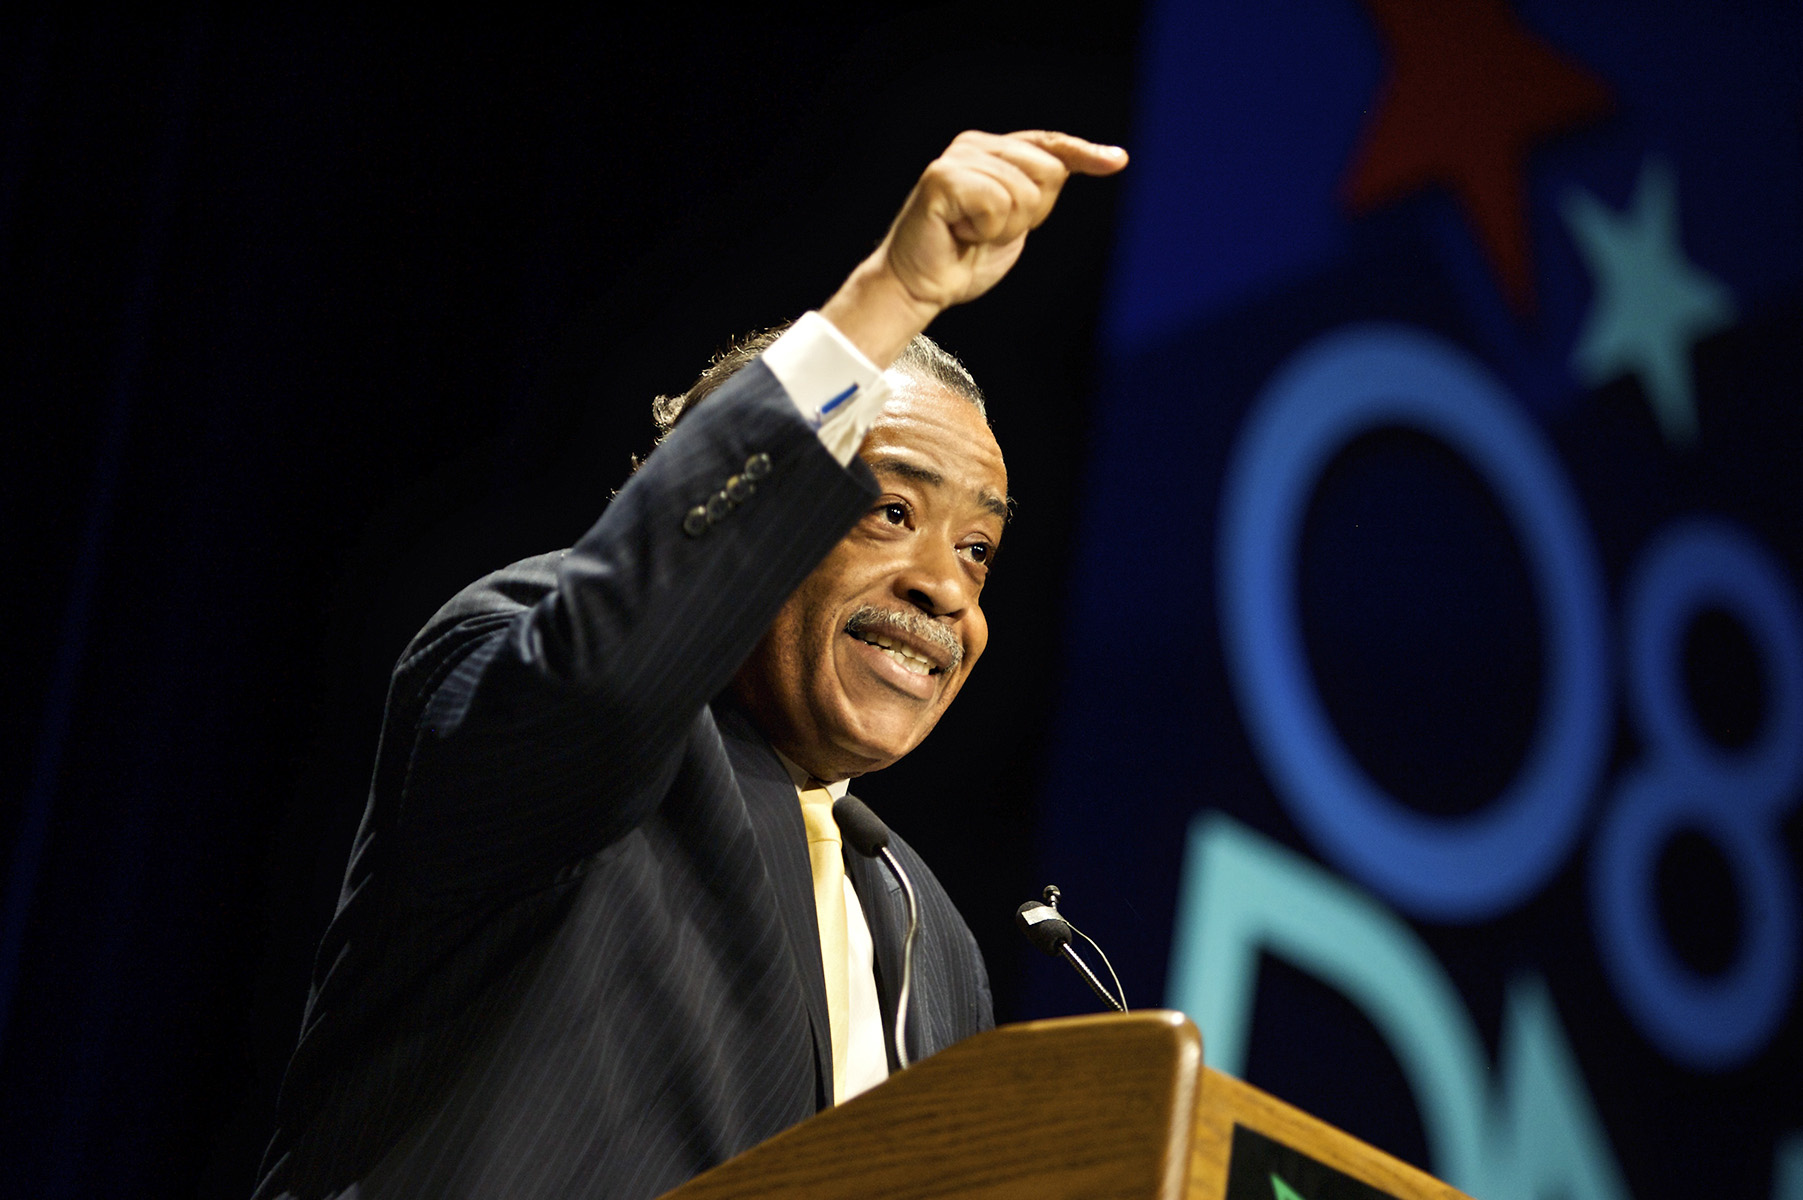 DENVER-AUGUST 27: Reverend Al Sharpton addresses the Congressional Black Caucus at the Denver Convention Center during the Democratic National Convention August 27, 2008. Sharpton told the audience that Obama's election would benefit all of Americans not just African-Americans. Senator Obama will become the first African-American candidate for president from a major political party this week. 